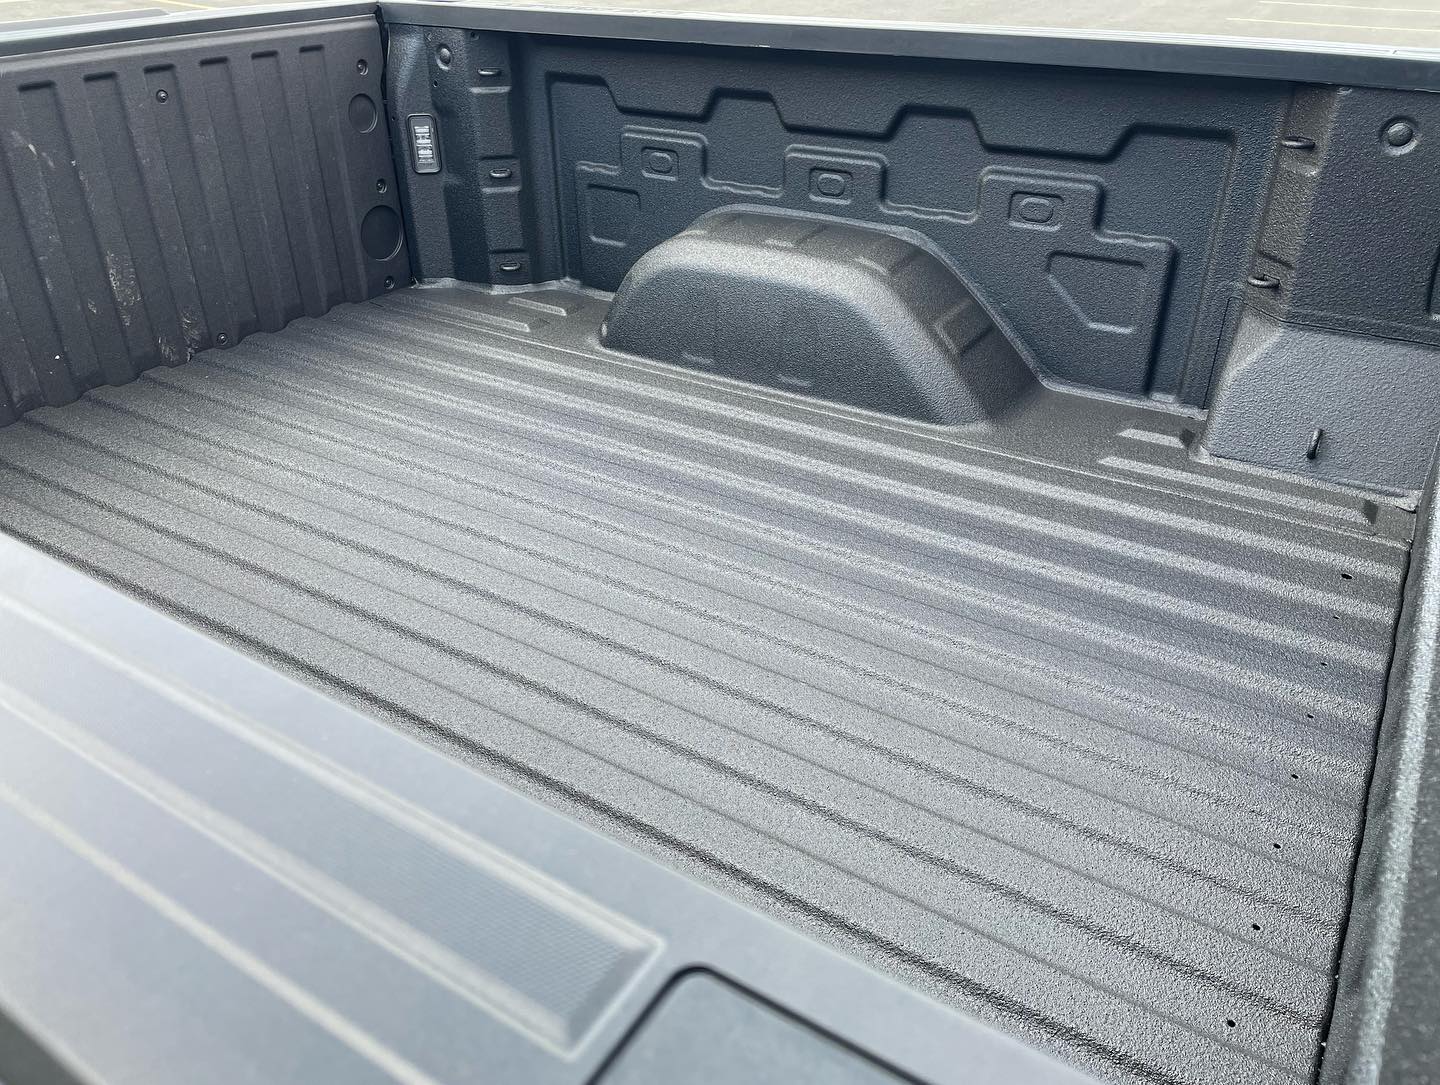 AK Bedliners: High-Quality, Durable Spray-On Bed Liner